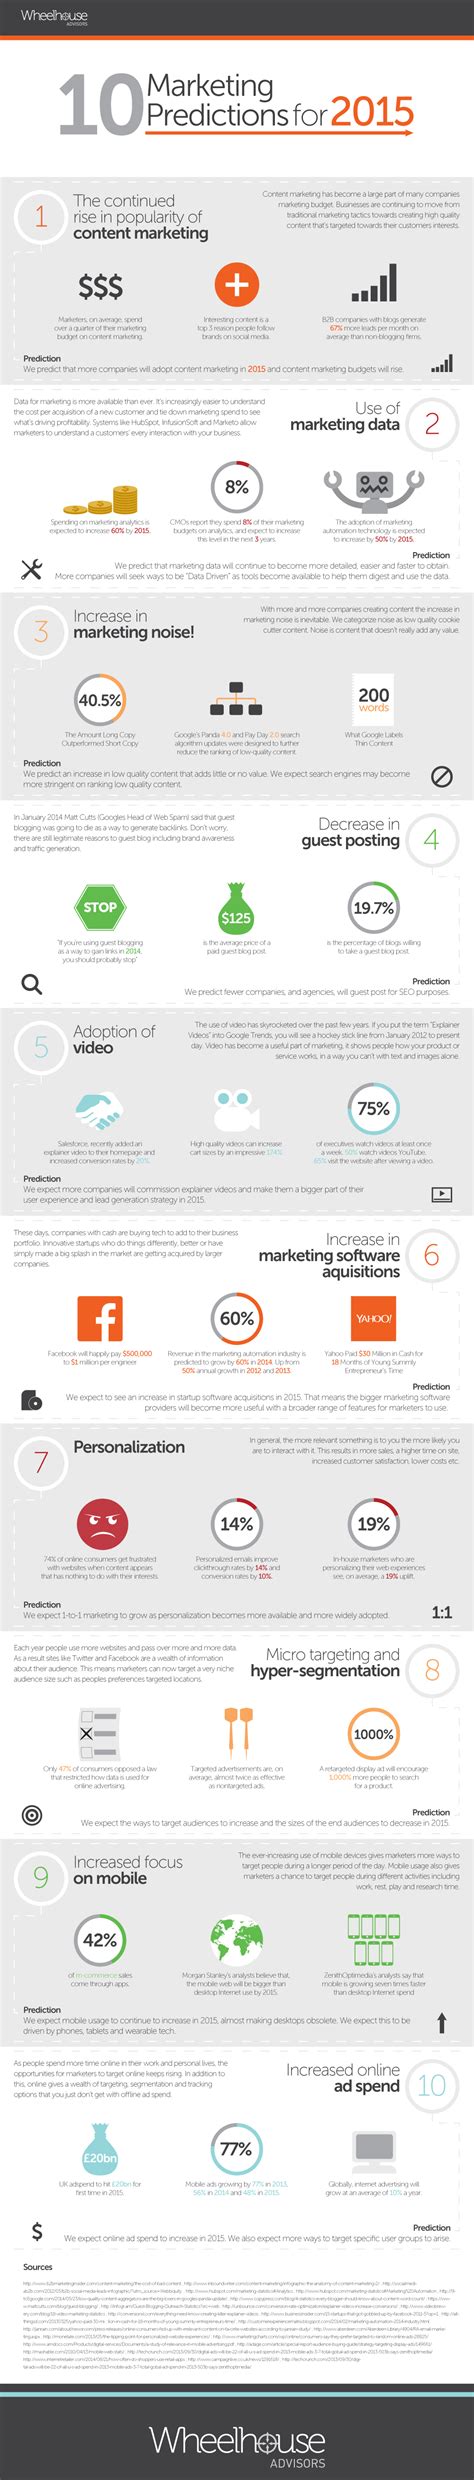 marketing predictions   infographic business  community